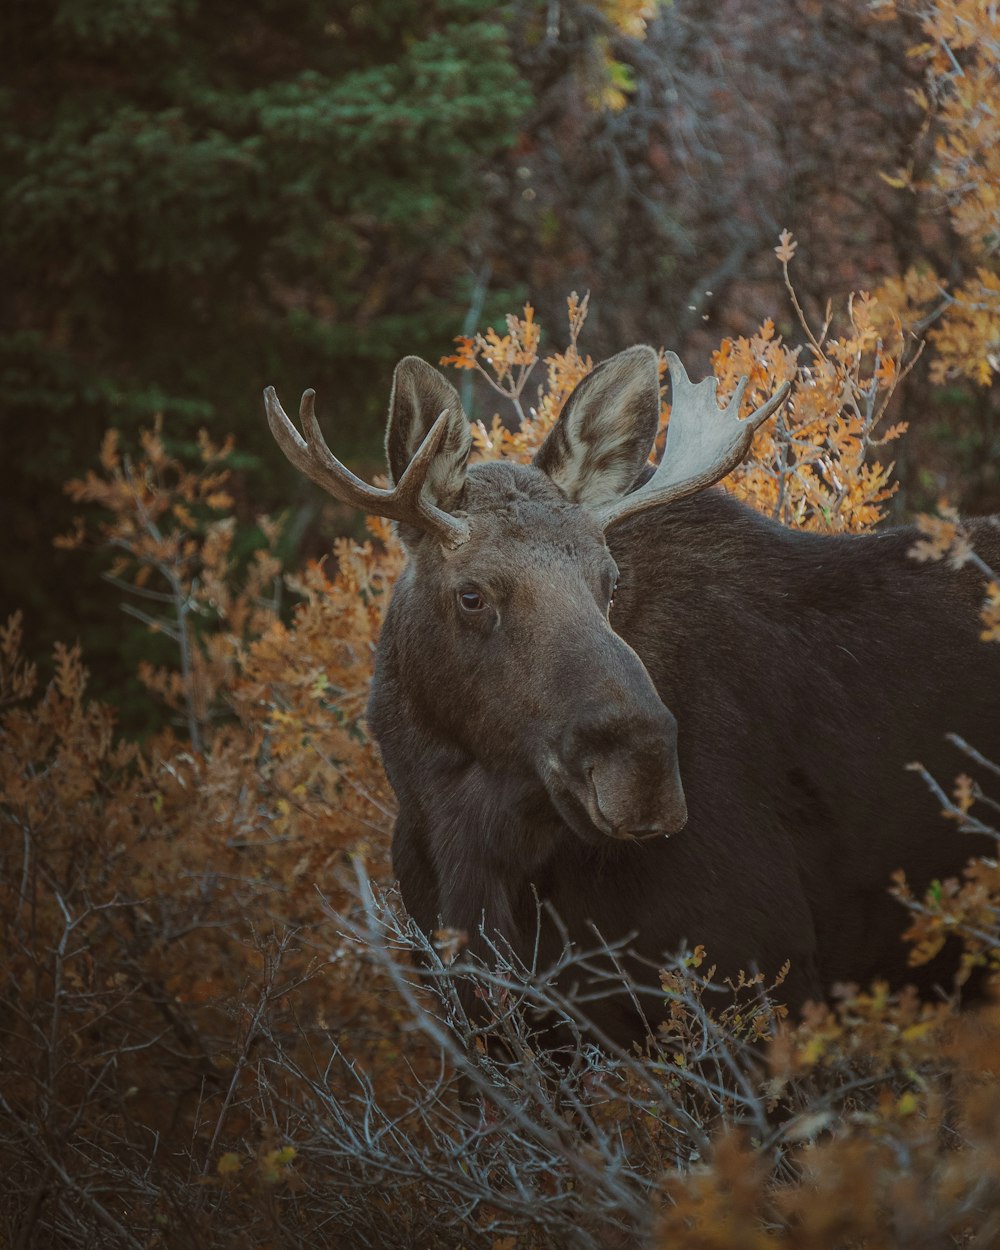 a large moose standing in a forest next to trees